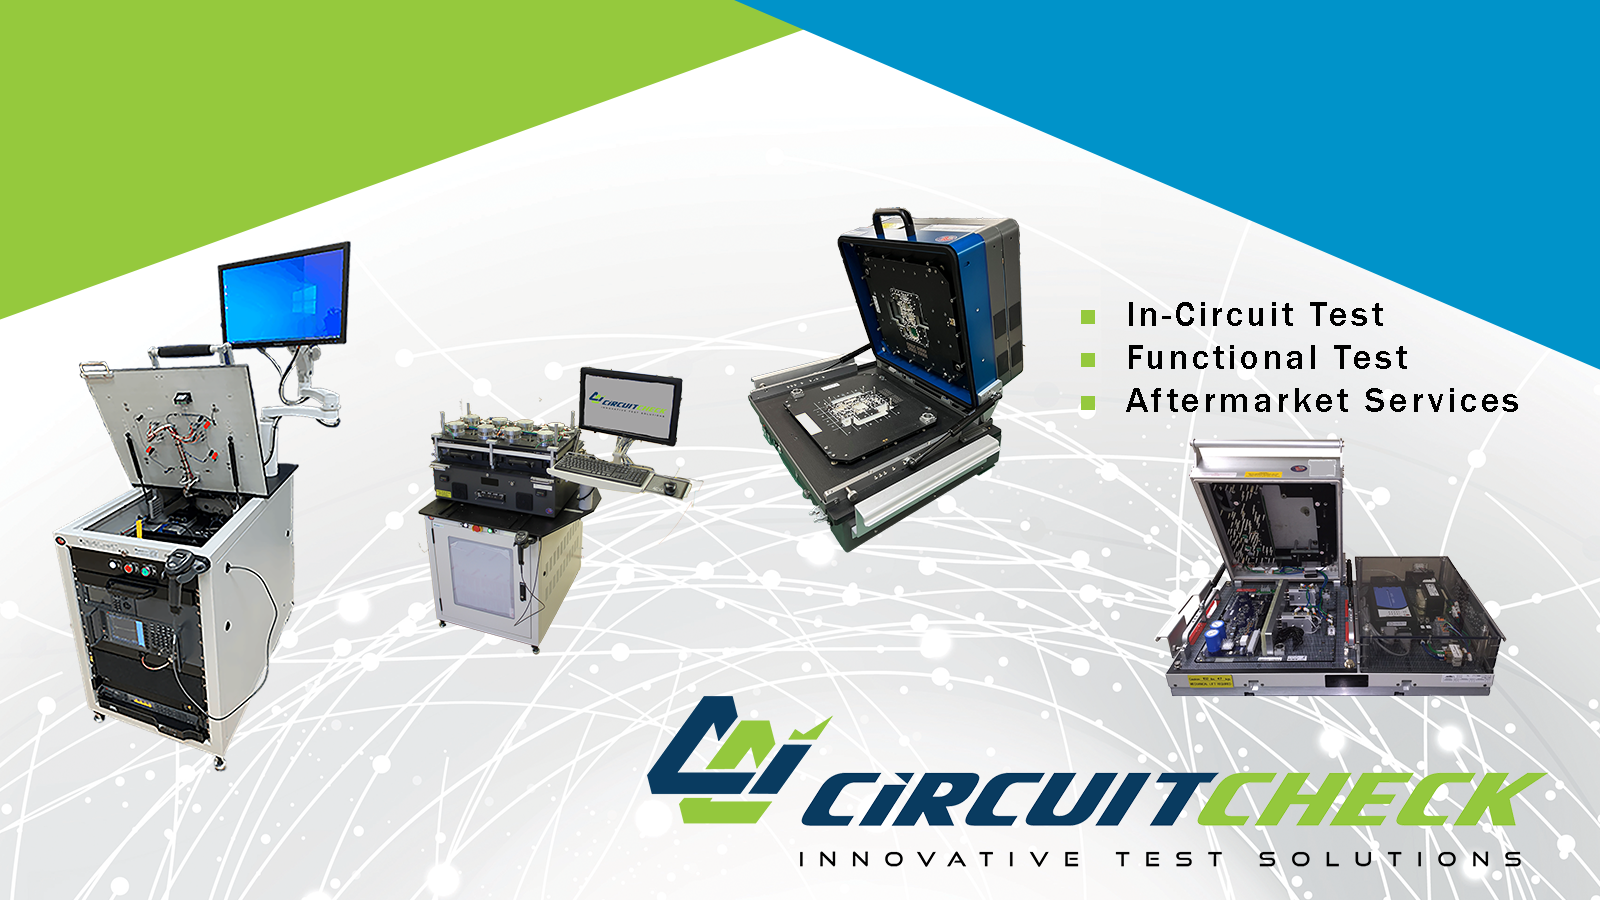 Circuit Check Announces Reorganization to Better Serve Our Customers Testing Needs